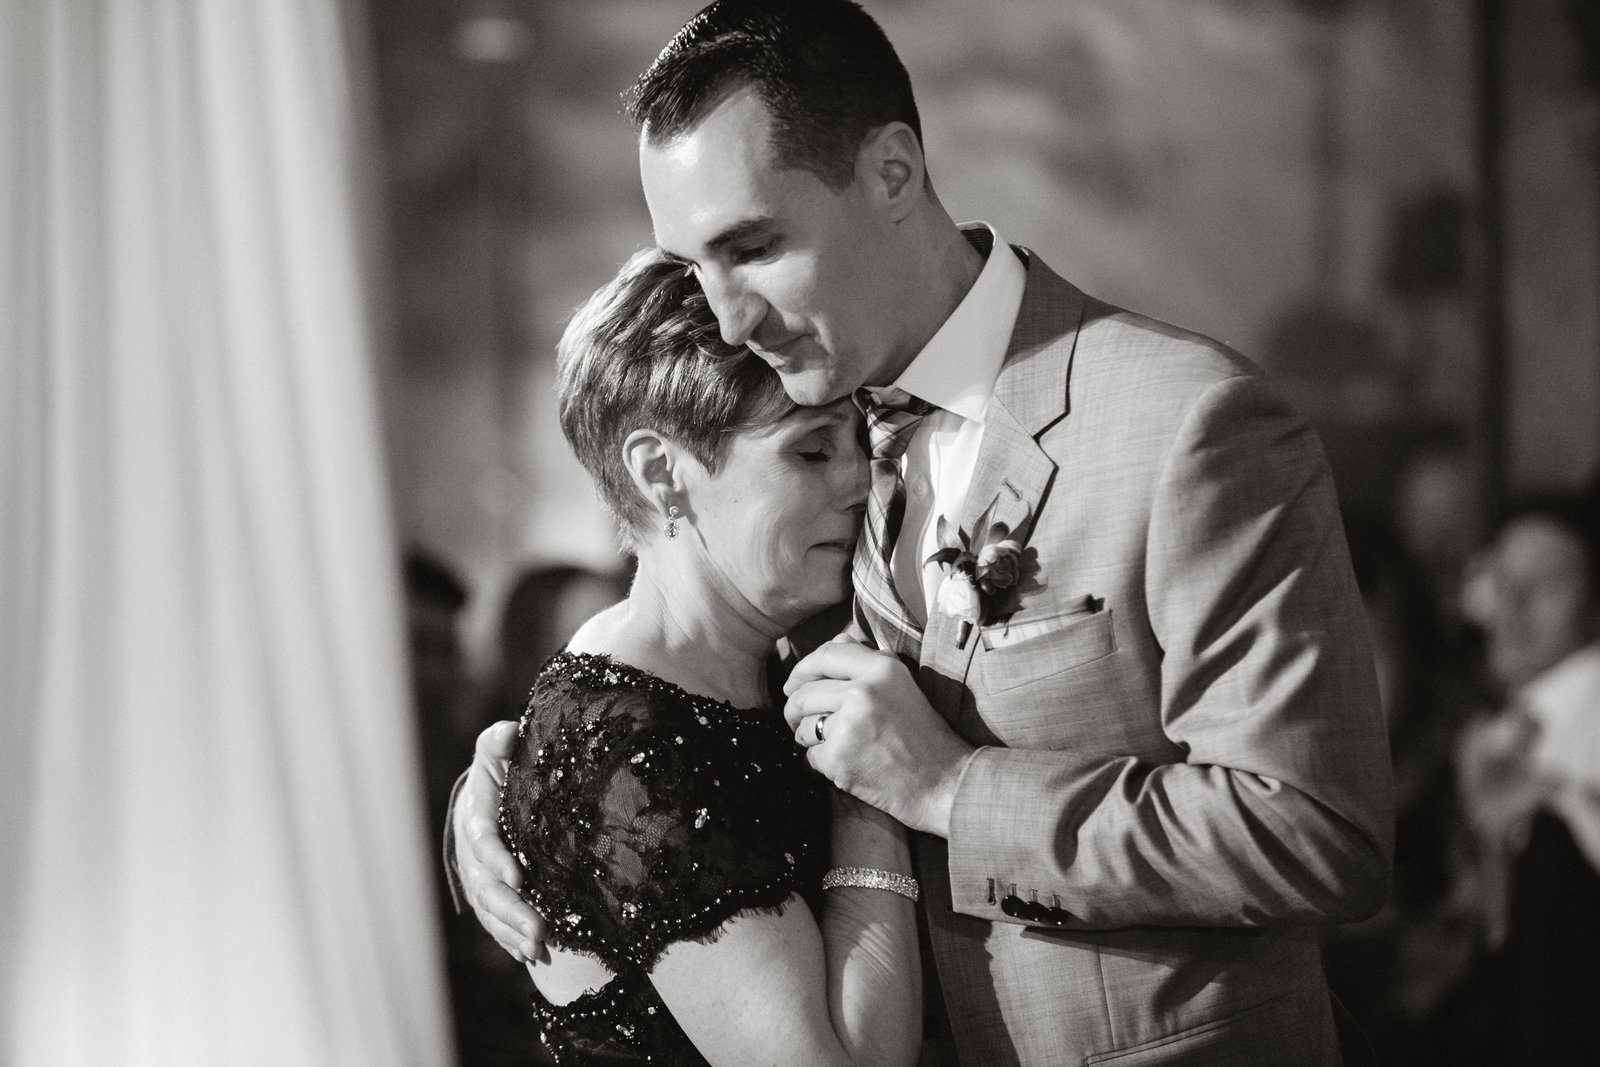 Groom and his mother share a dance at this Philadelphia wedding reception.